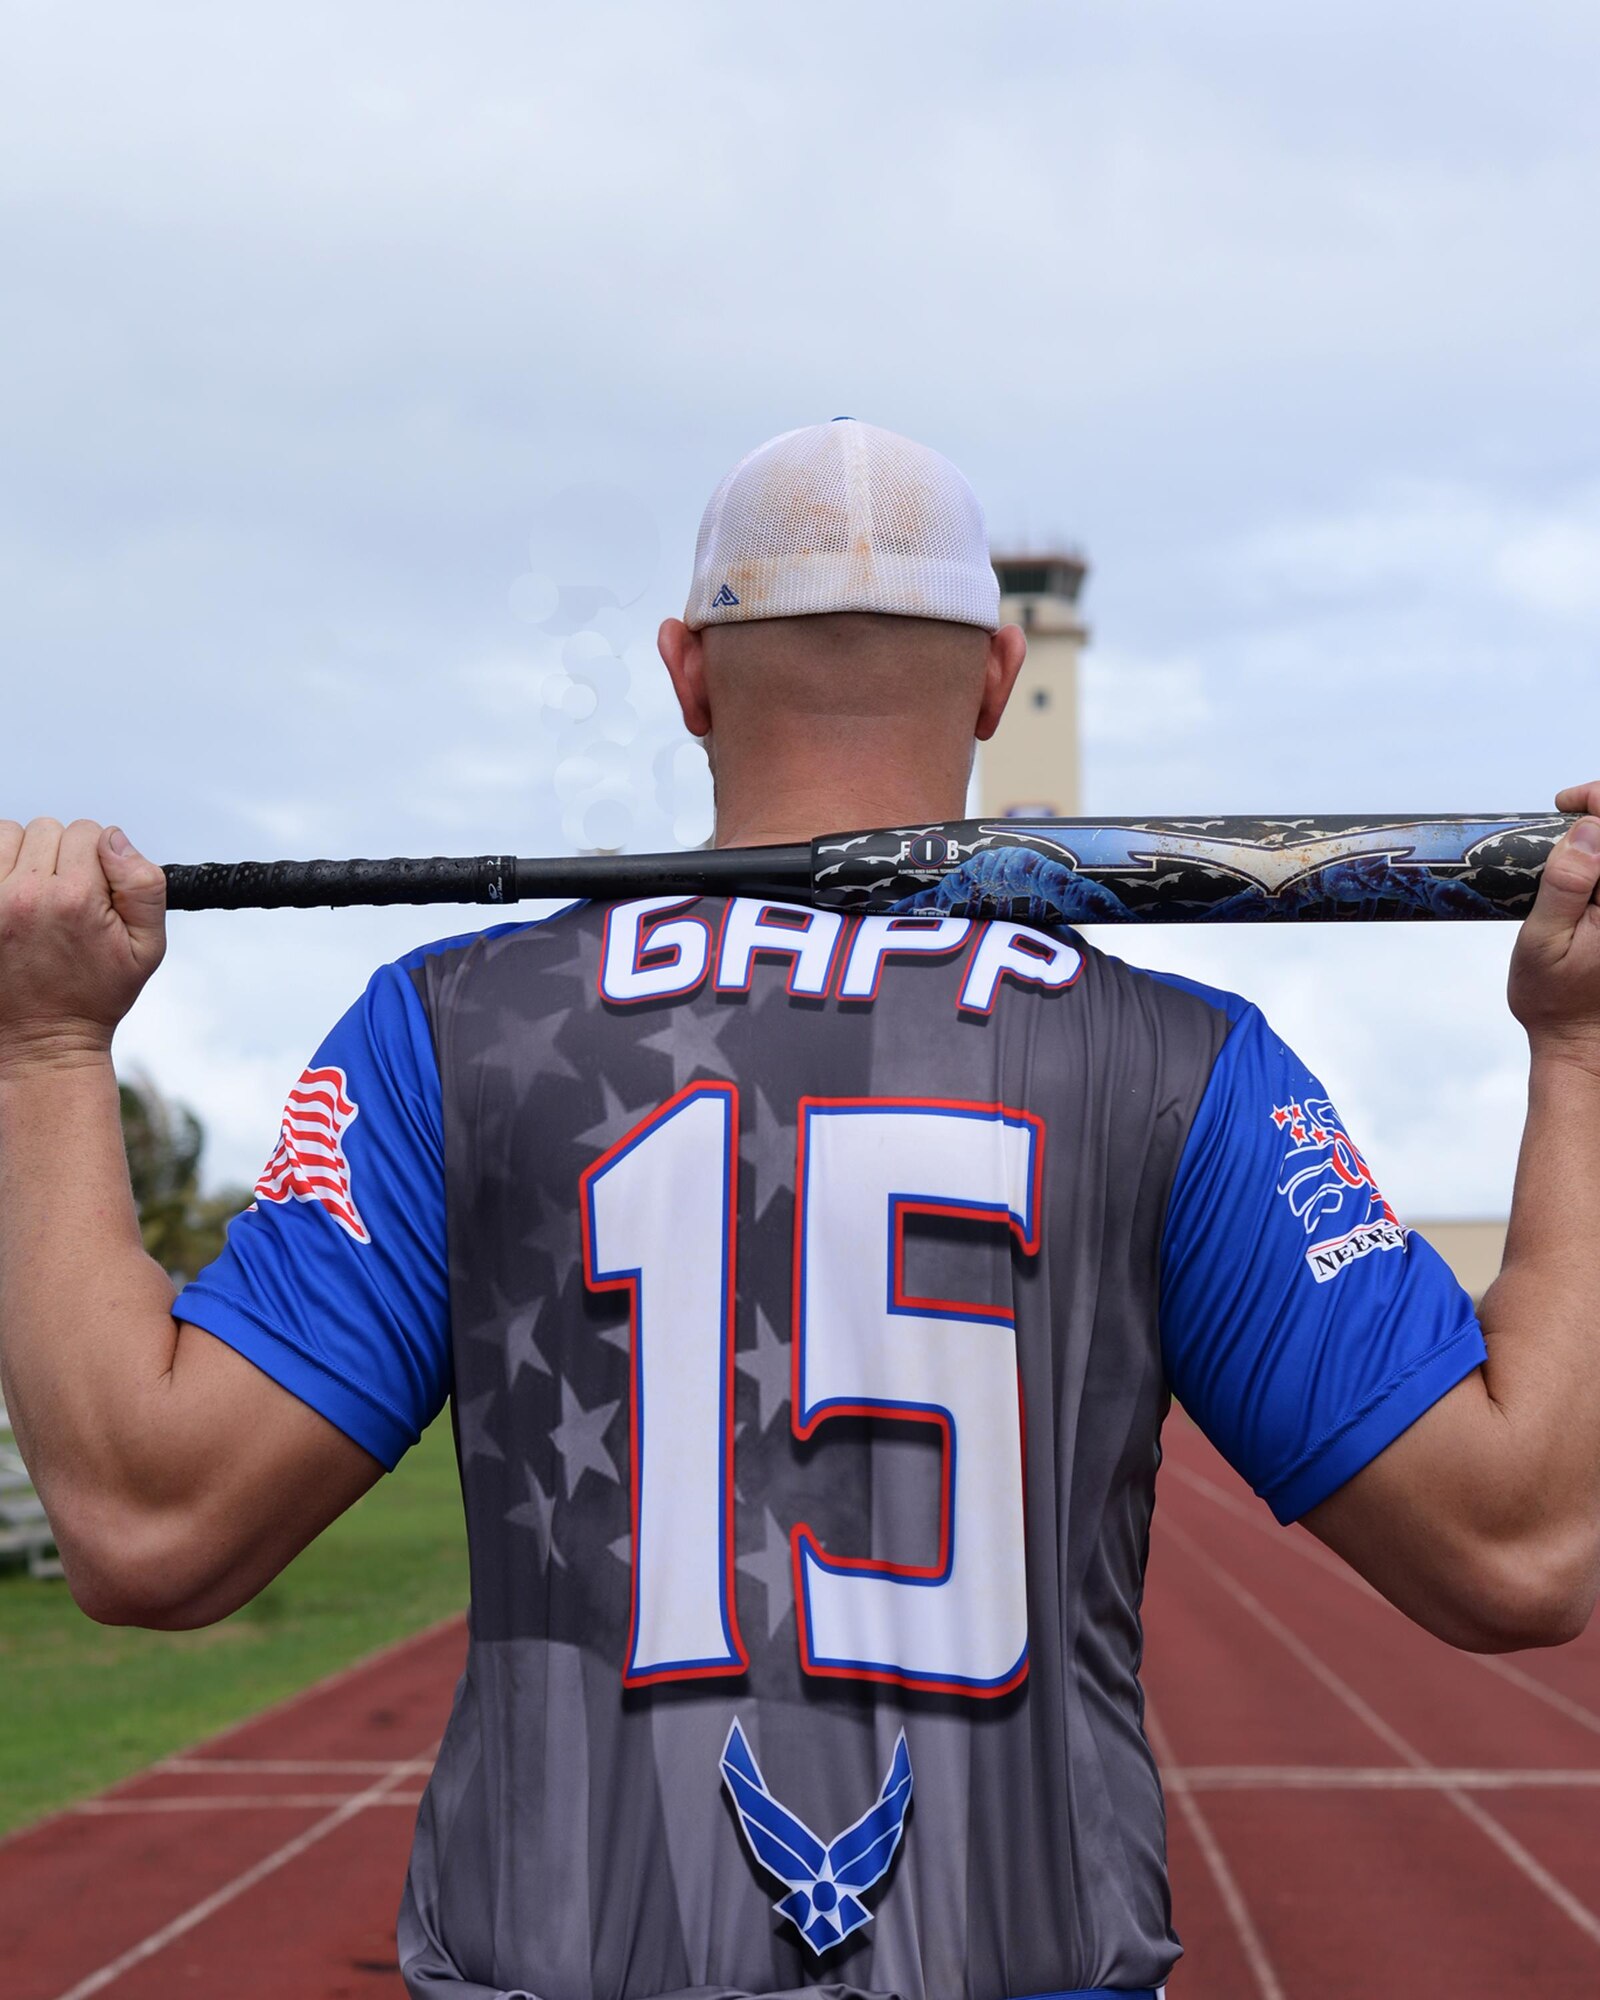 Staff Sgt. Garrett Gapp, 36th Maintenance Squadron, NCO in charge of maintenance flight, poses for a photo Oct. 31, 2016 at Andersen Air Force Base, Guam. Gapp was selected out of 51 applicants to try-out and was one of 23 men to make the All-Air Force Men’s Slow Pitch Softball Team this year as a first basemen. The team brought home the silver medal this year with a record of 5-4. (U.S. Air Force photo by Senior Airman Cierra Presentado/Released)